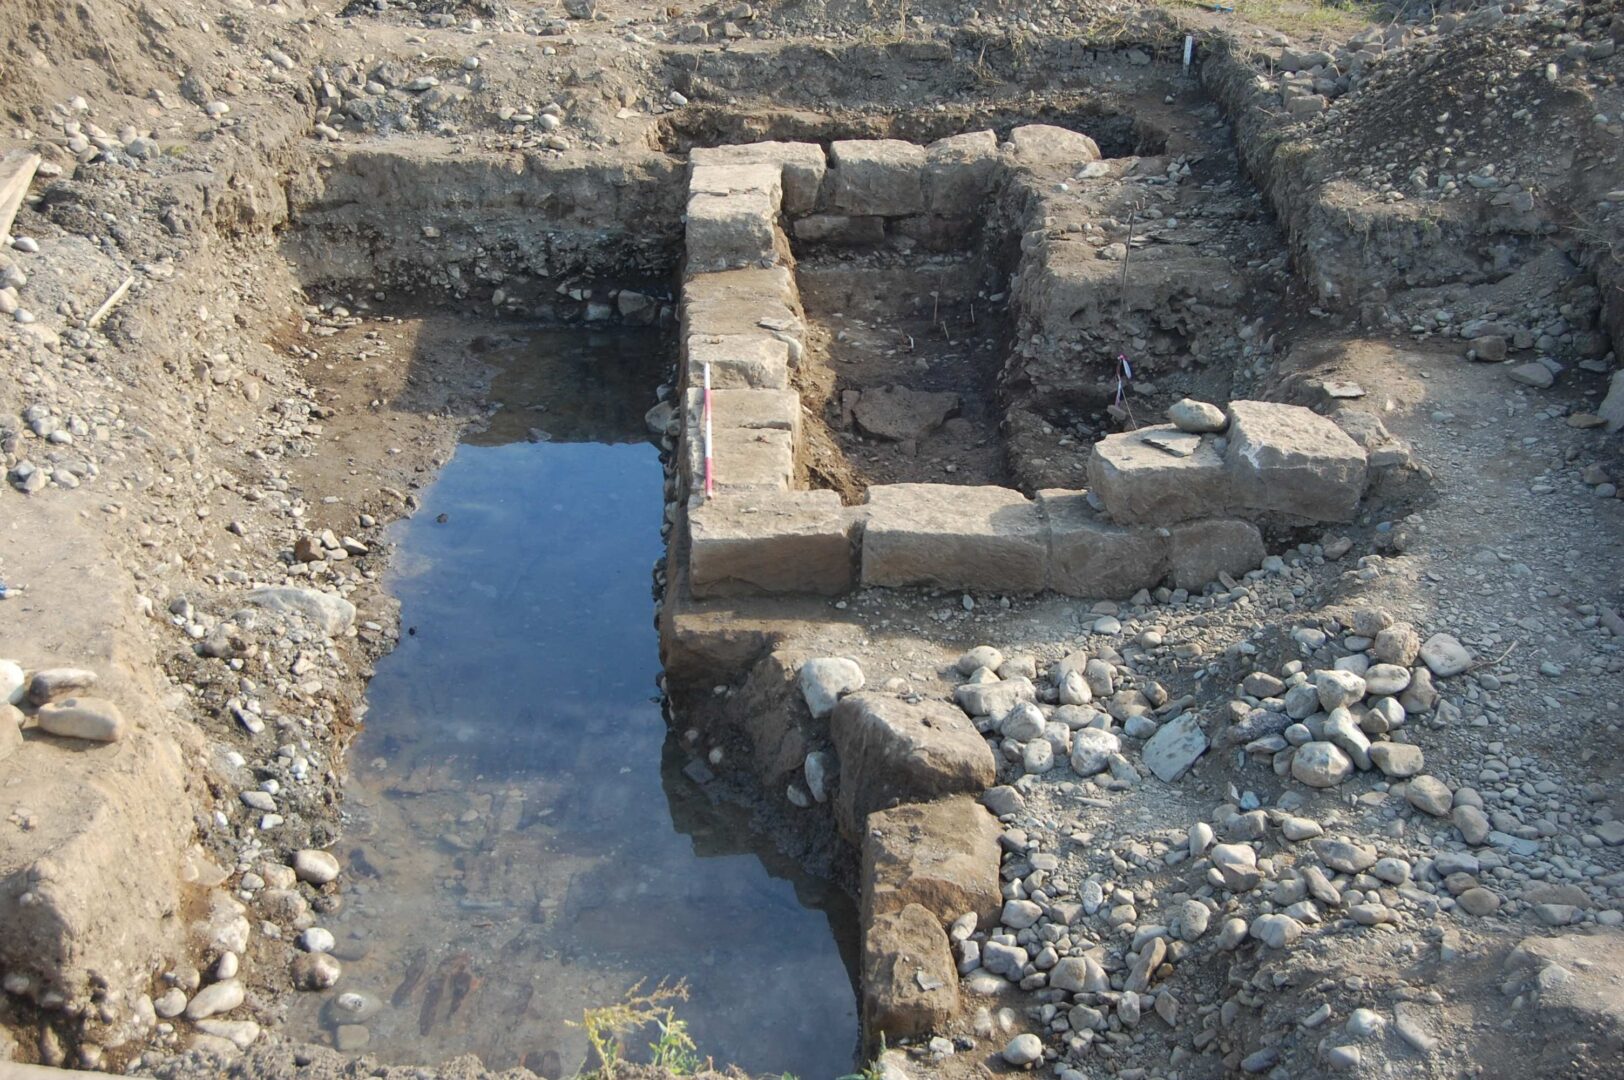 Remains of the 2nd century Romano British watermill uncovered during archaeological excavations to the west of Cockermouth in 2010